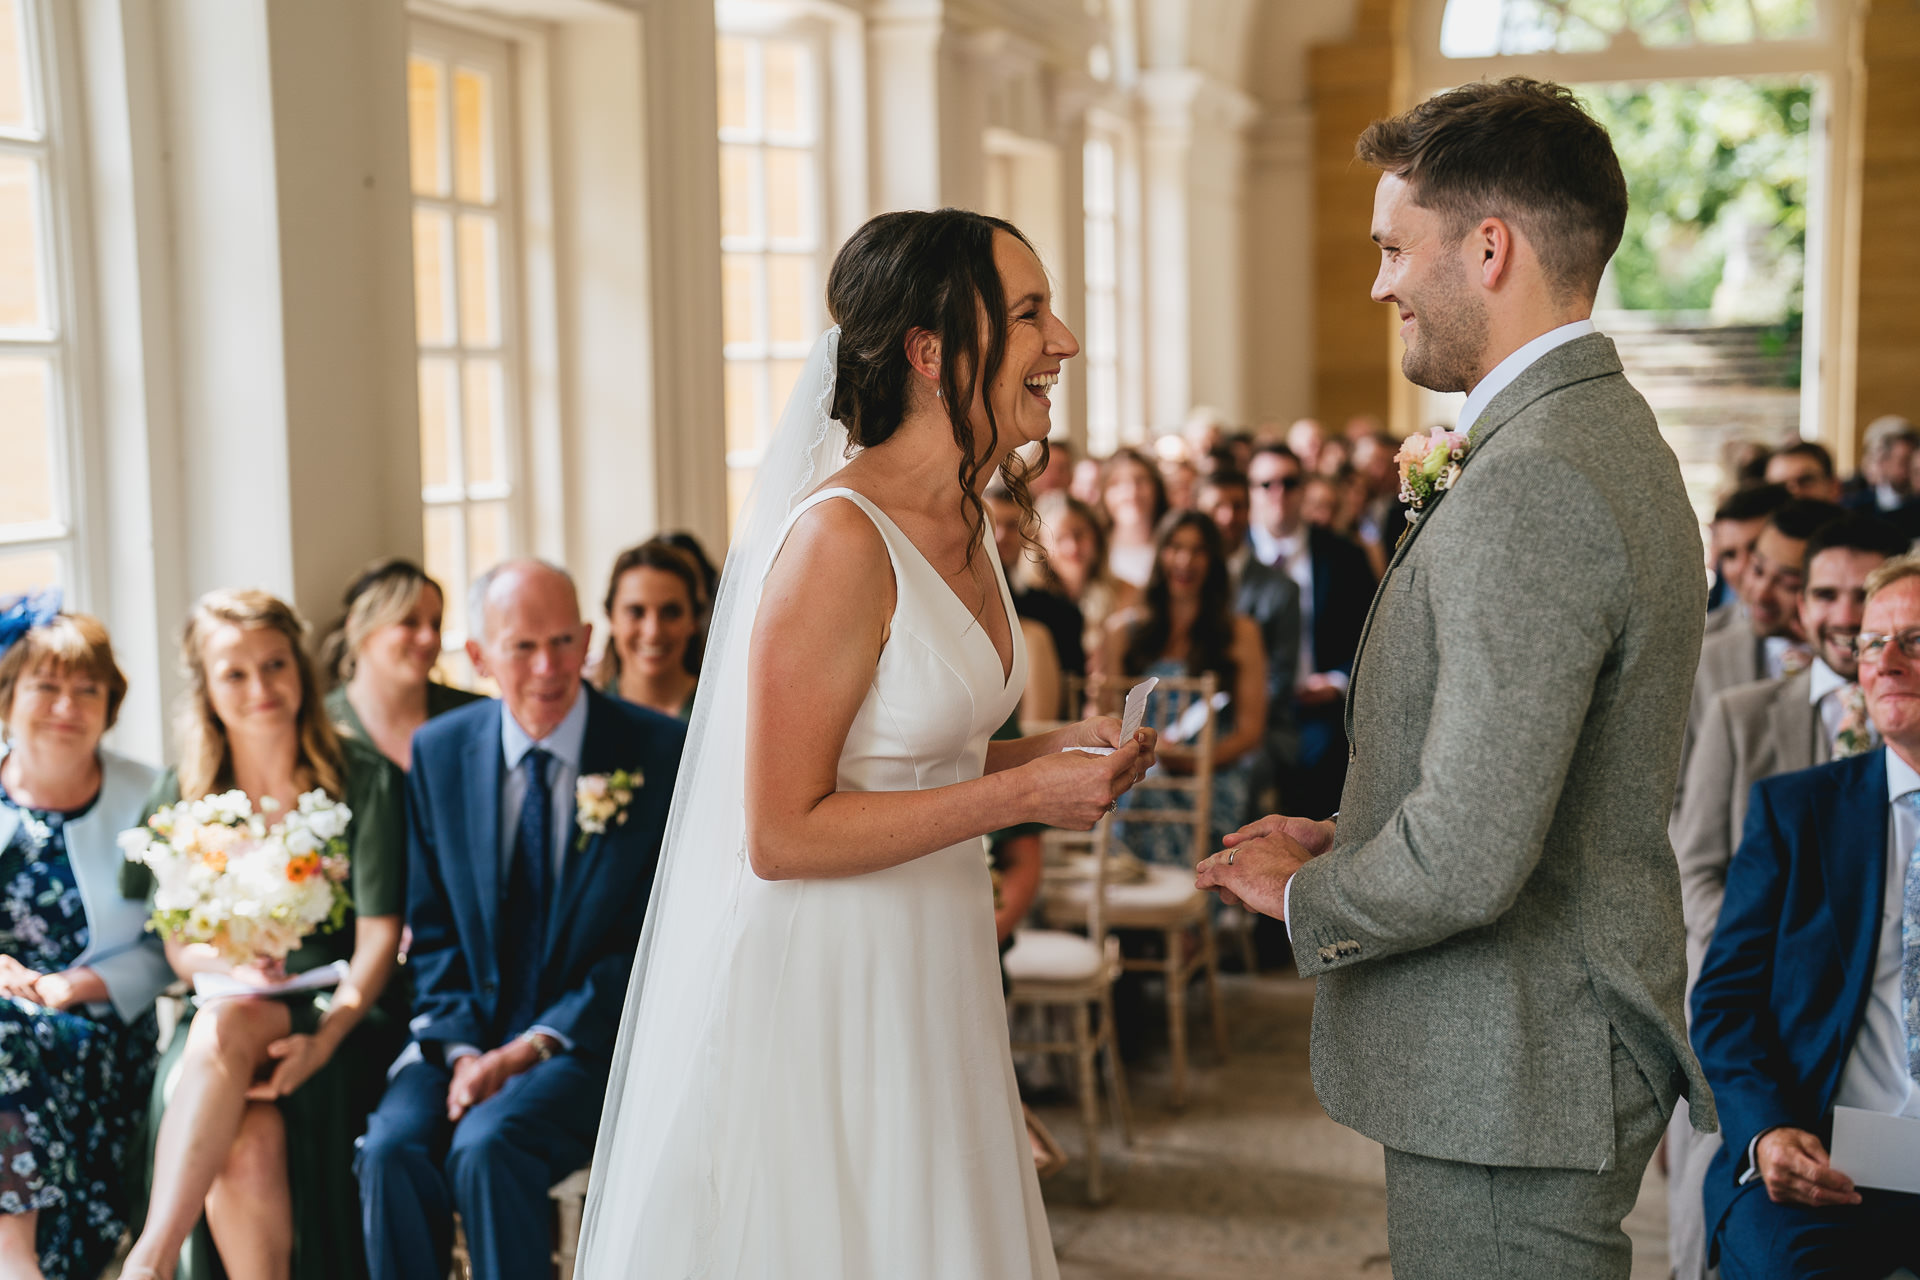 The bride and groom laughing together at their wedding in the orangery at Hestercombe Gardens